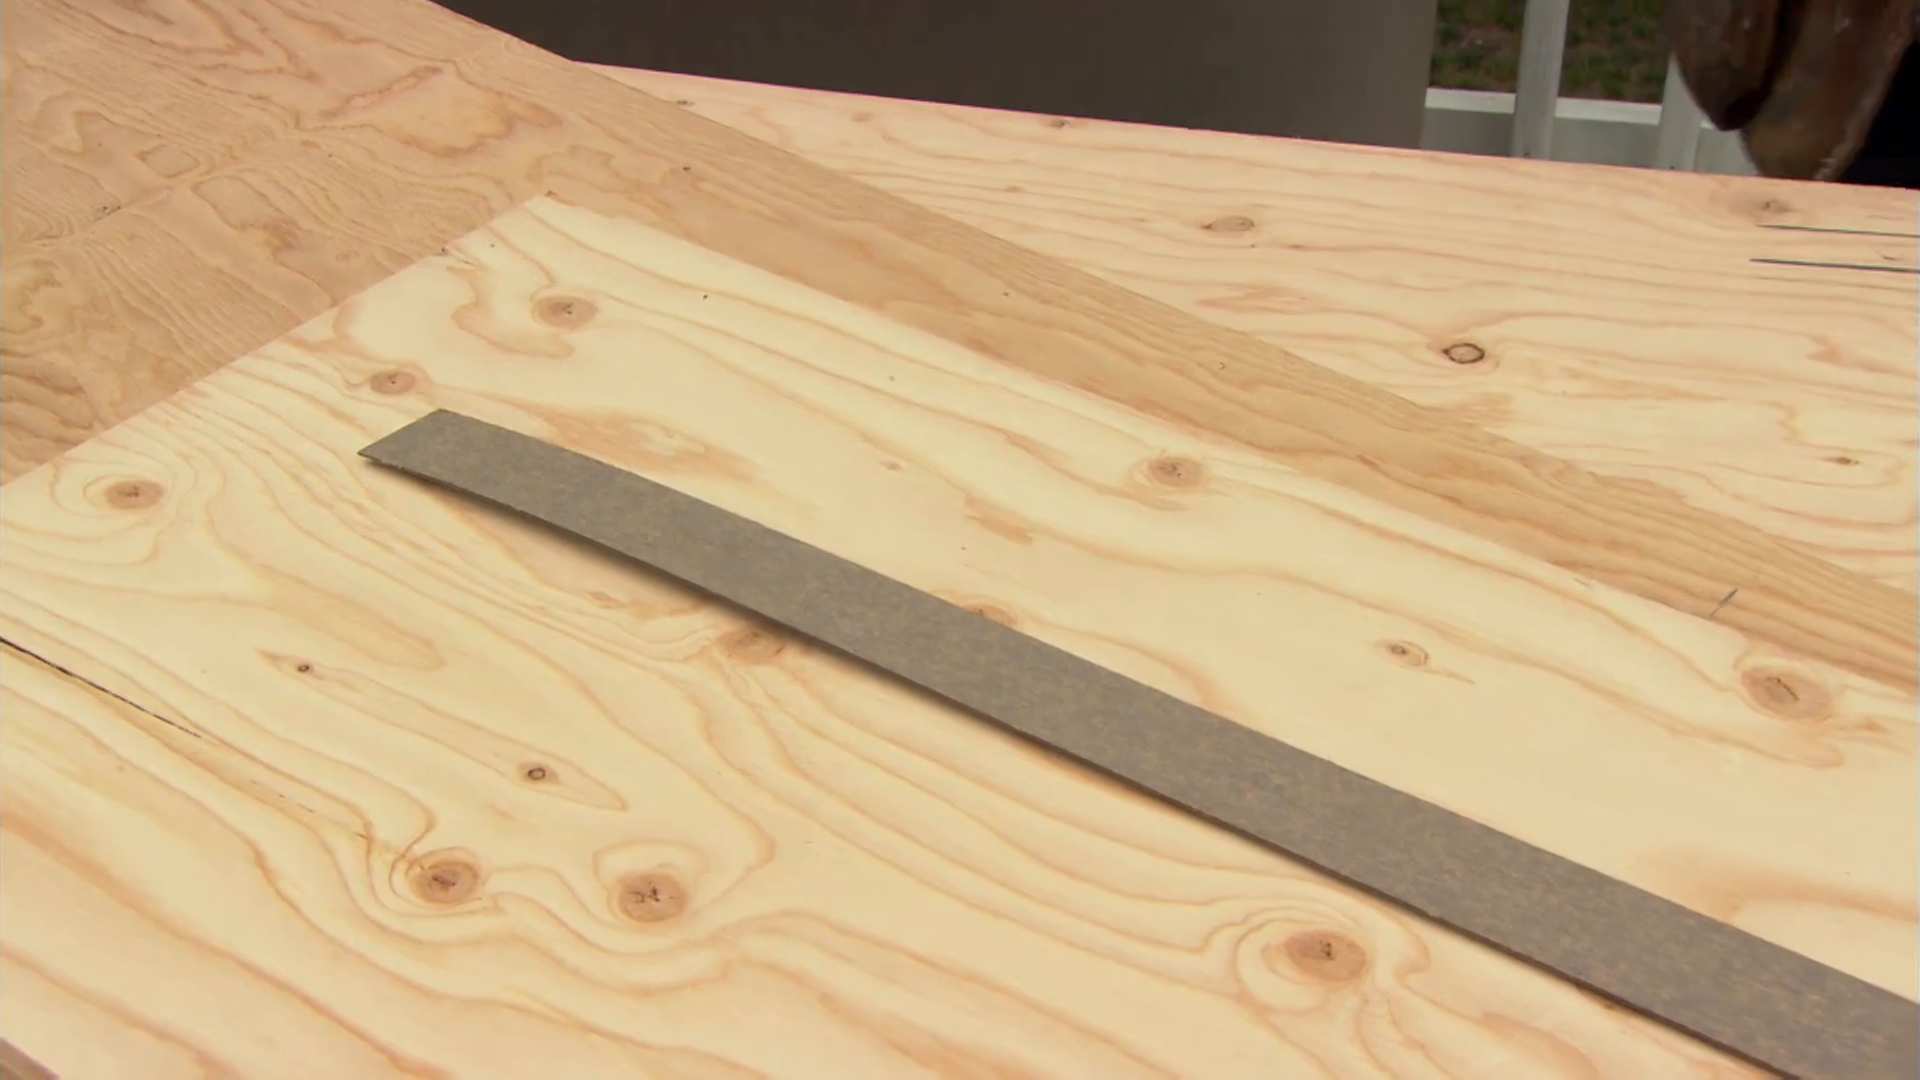 How To Build A Laminate Counter This Old House